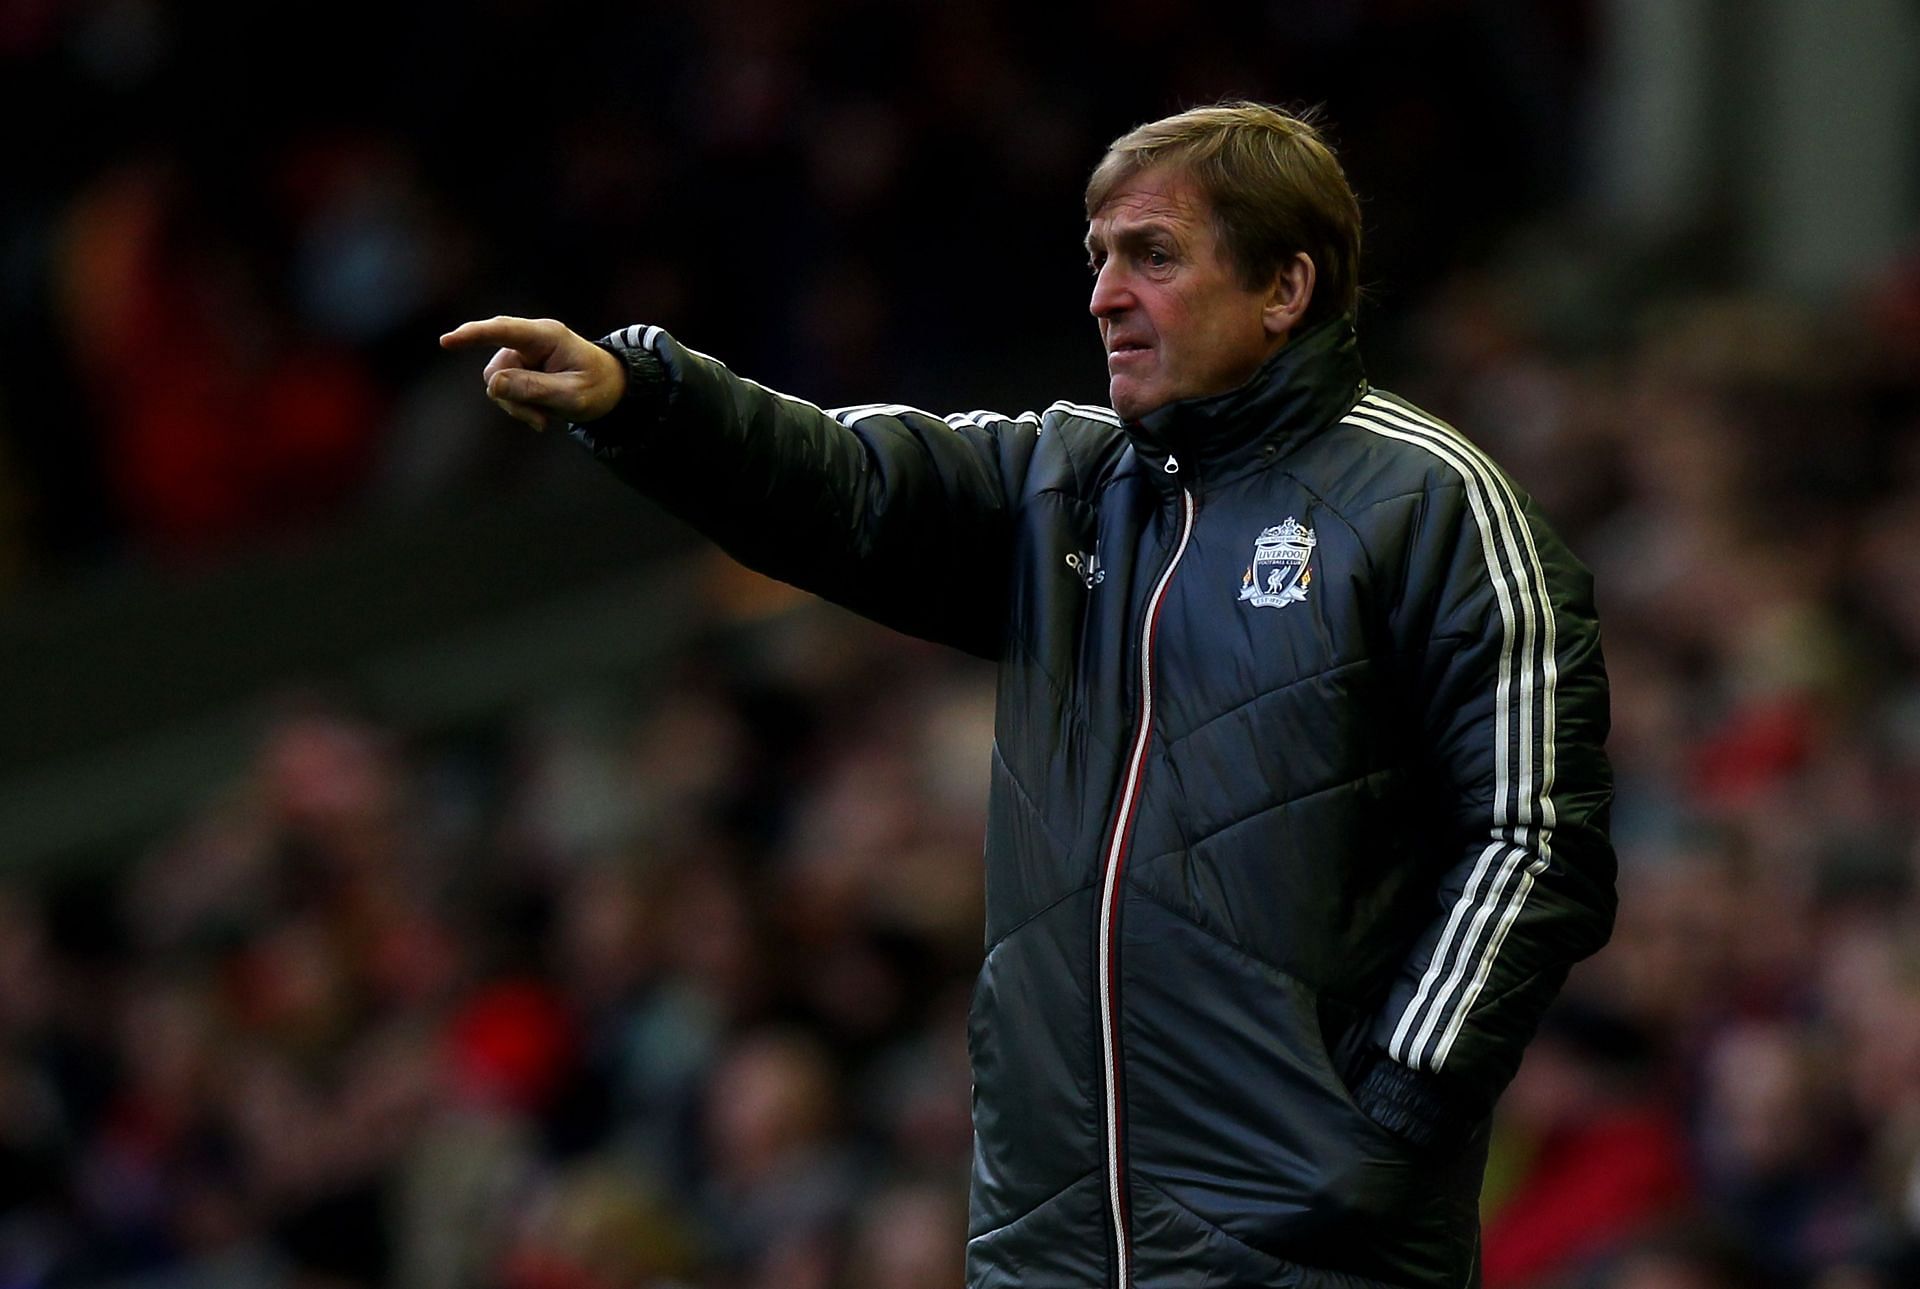 Sir Kenny had two spells as Liverpool manager from 1985-1991 and then from 2011-2012